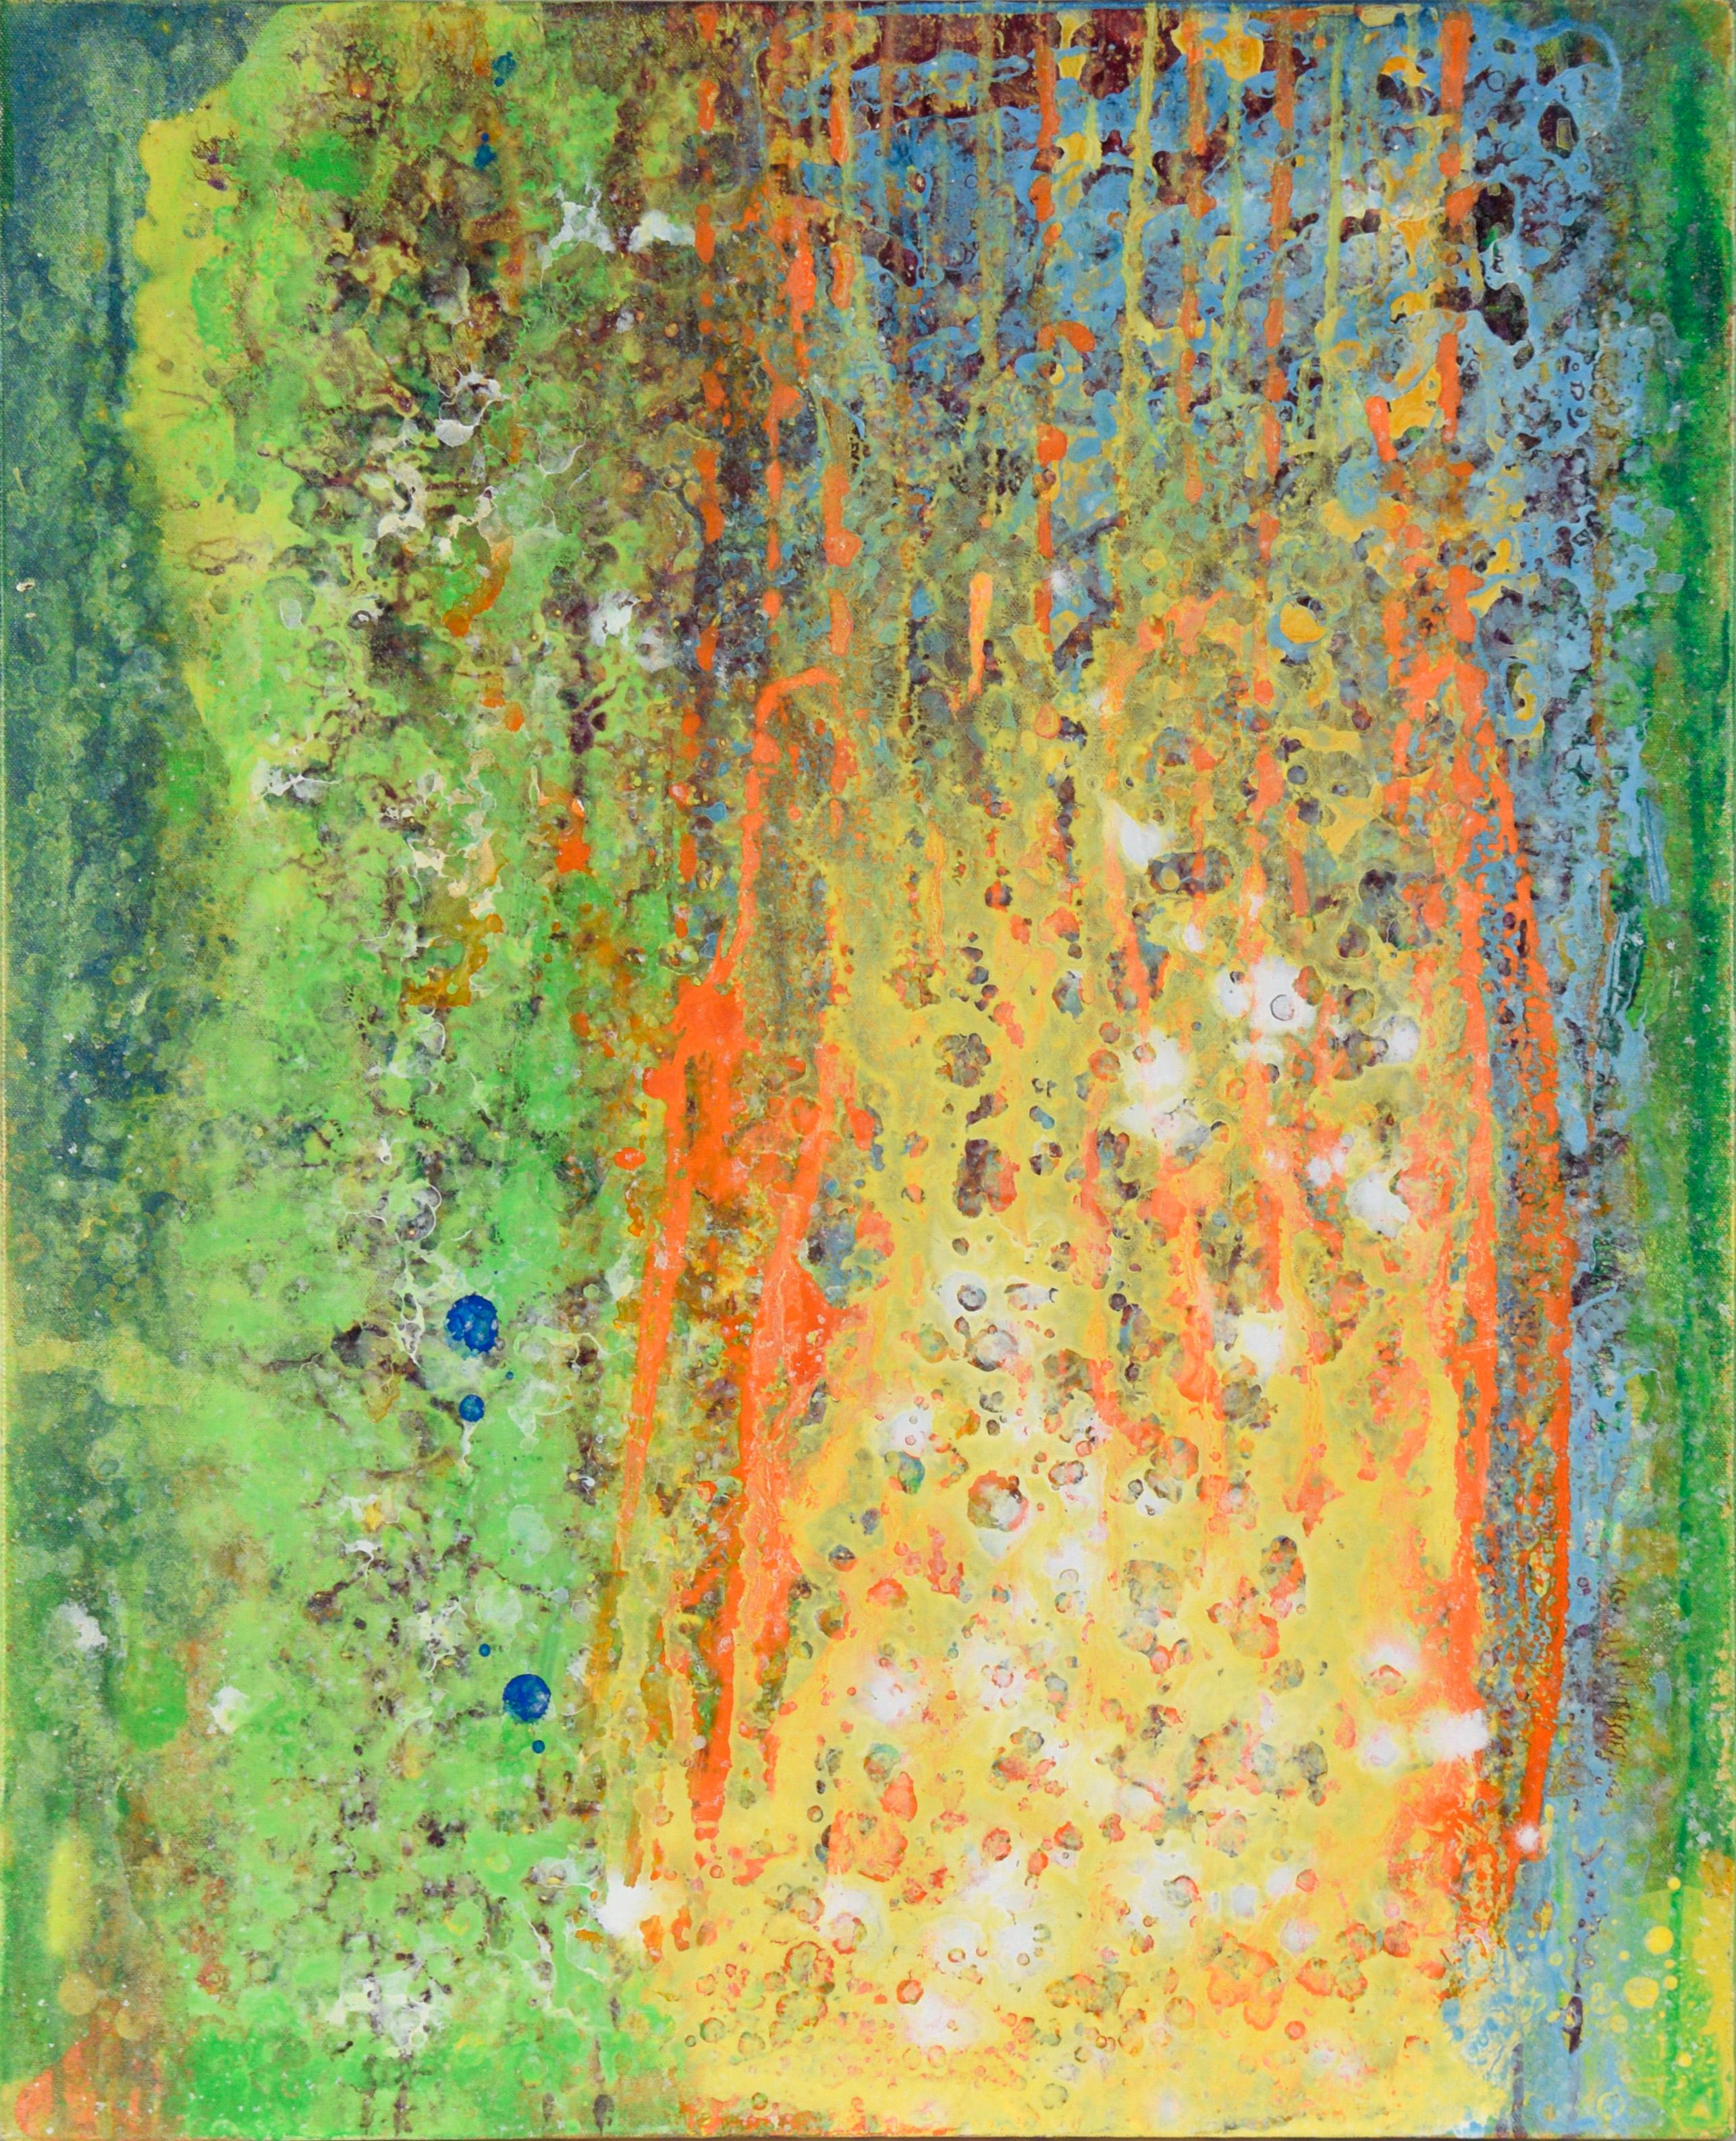 Charles David Francis Abstract Painting - Yellow, Green, and Orange - Abstract Expressionist Composition